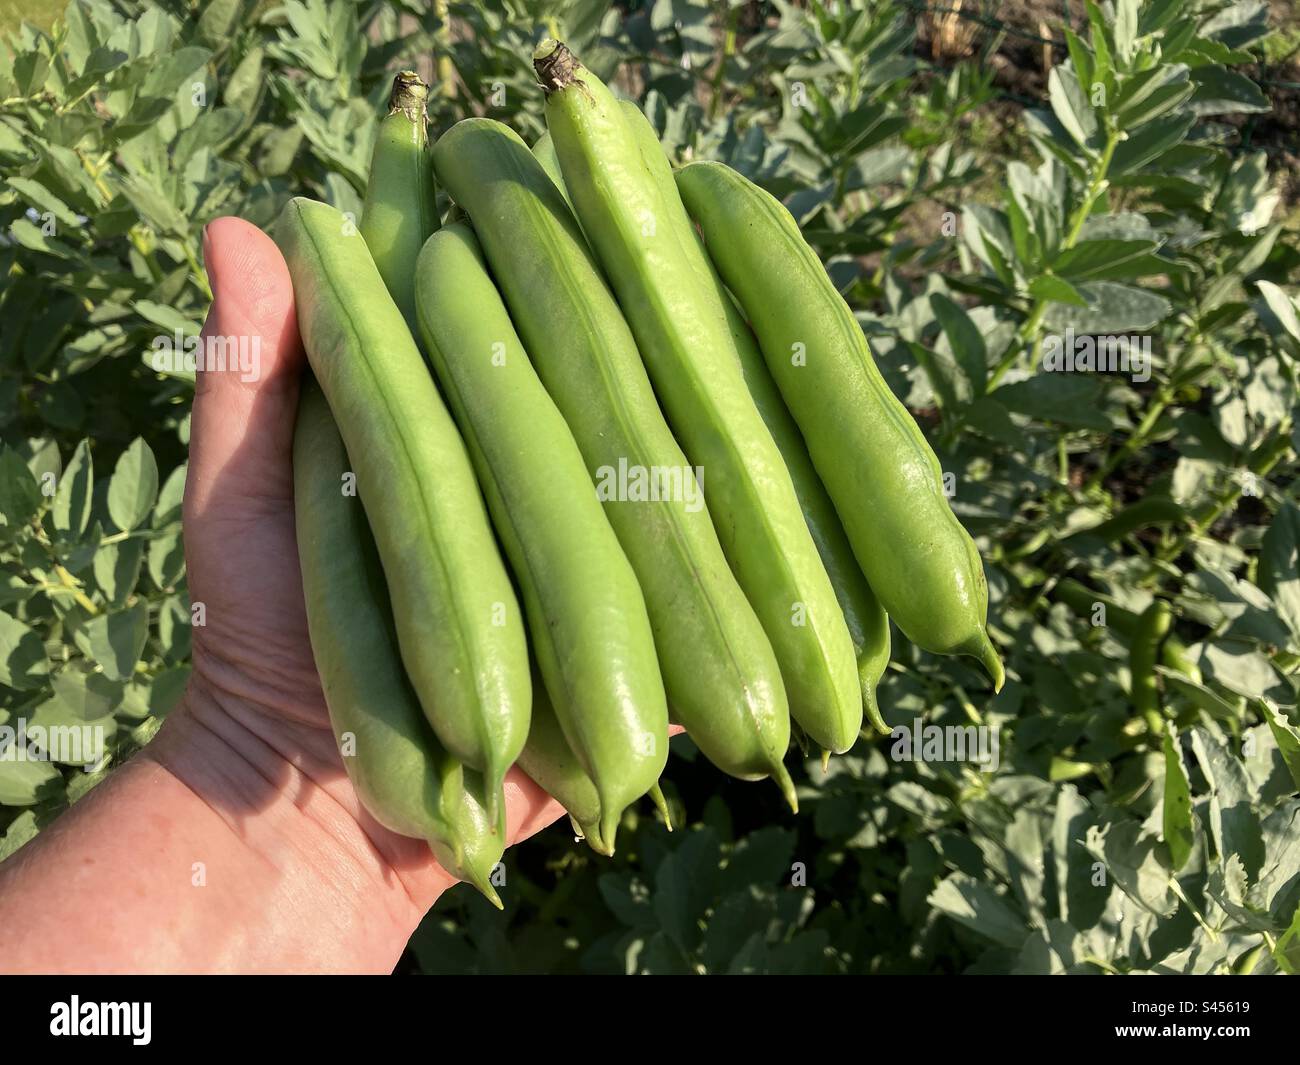 Homegrown, organic broad beans in woman’s hand, freshly picked from a garden vegetable patch Stock Photo